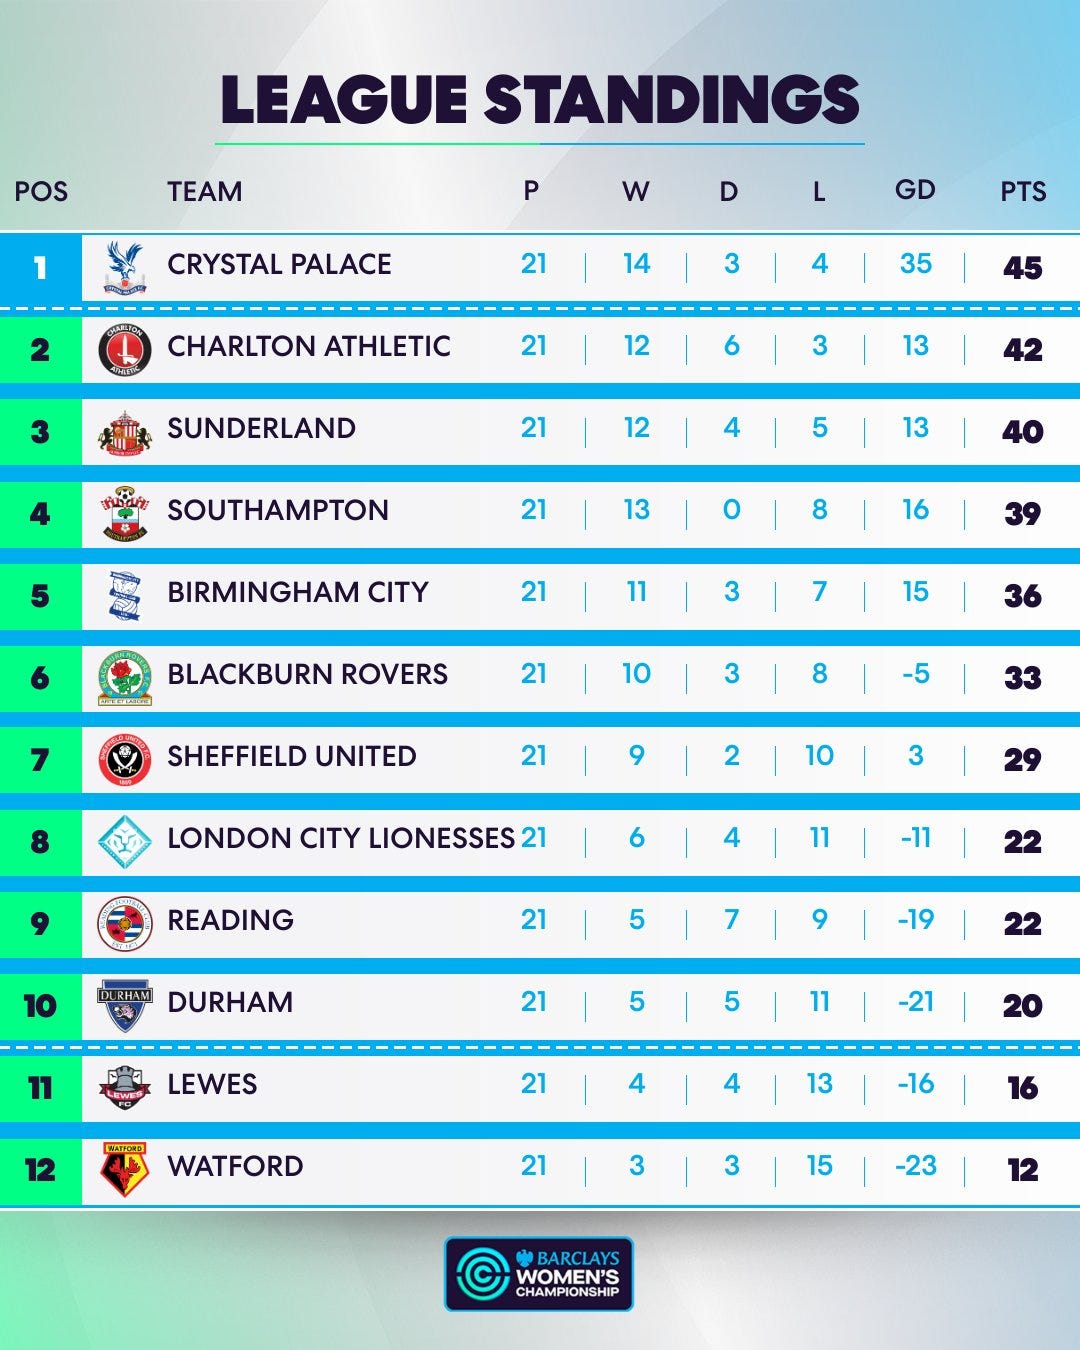 BWC Table: Crystal Palace are first with 45 points and Charlton are second with 42 points
Lewes are 11th with 16 and Durham are 10th with 20.